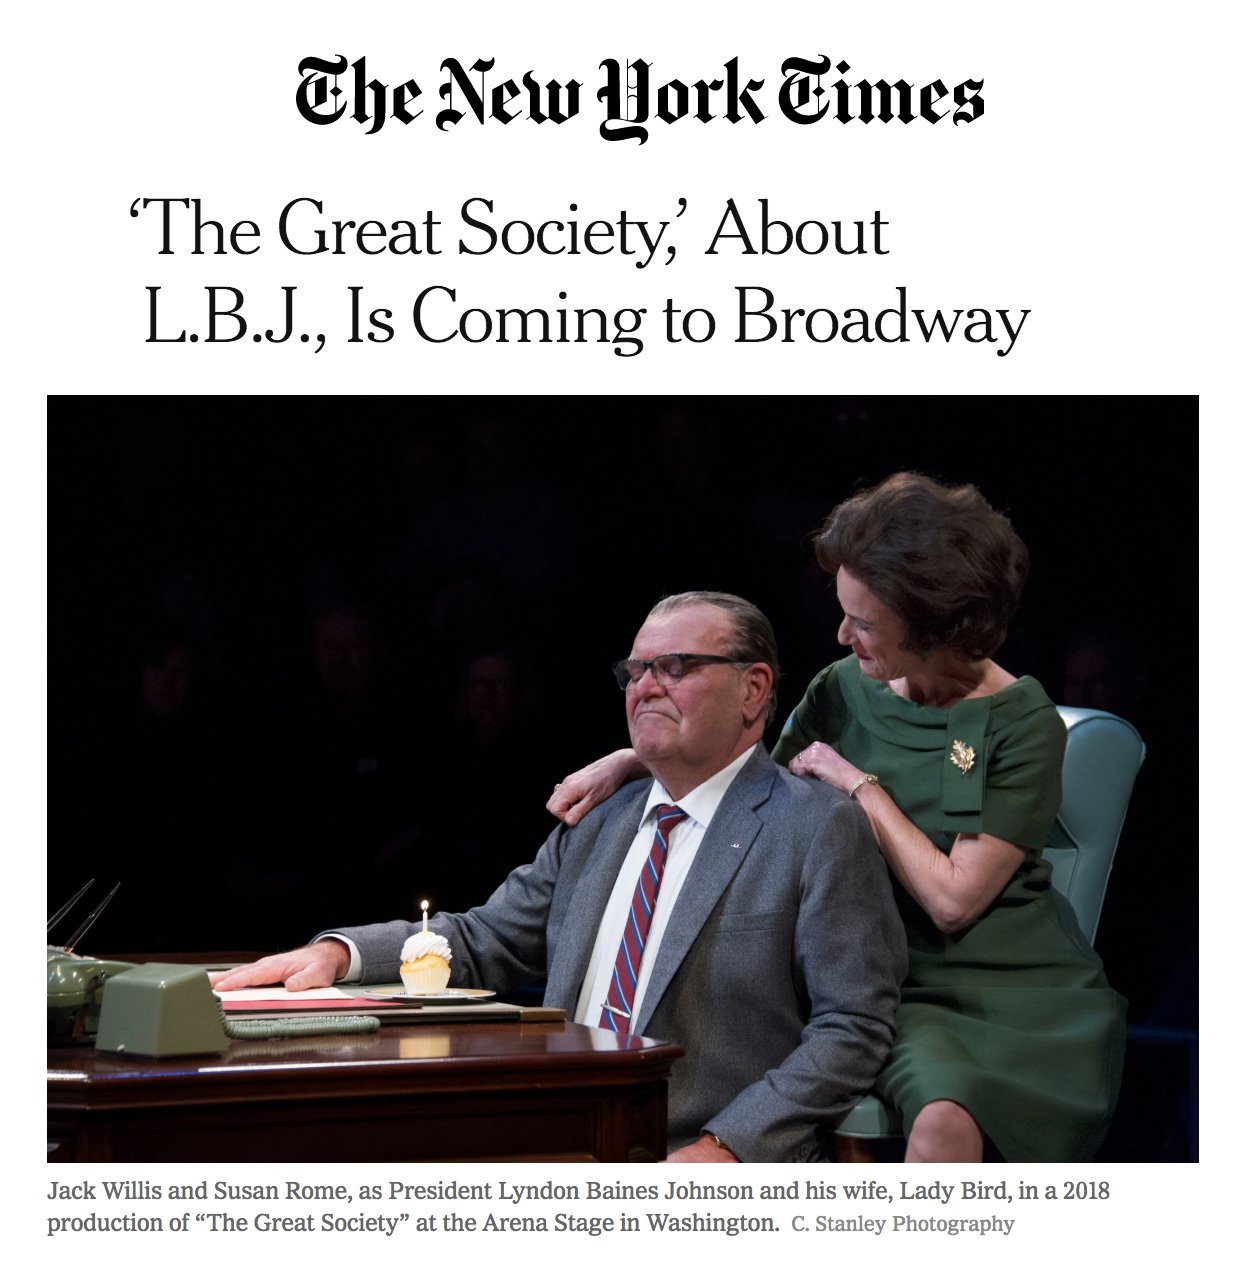 The New York Times announcement of THE GREAT SOCIETY